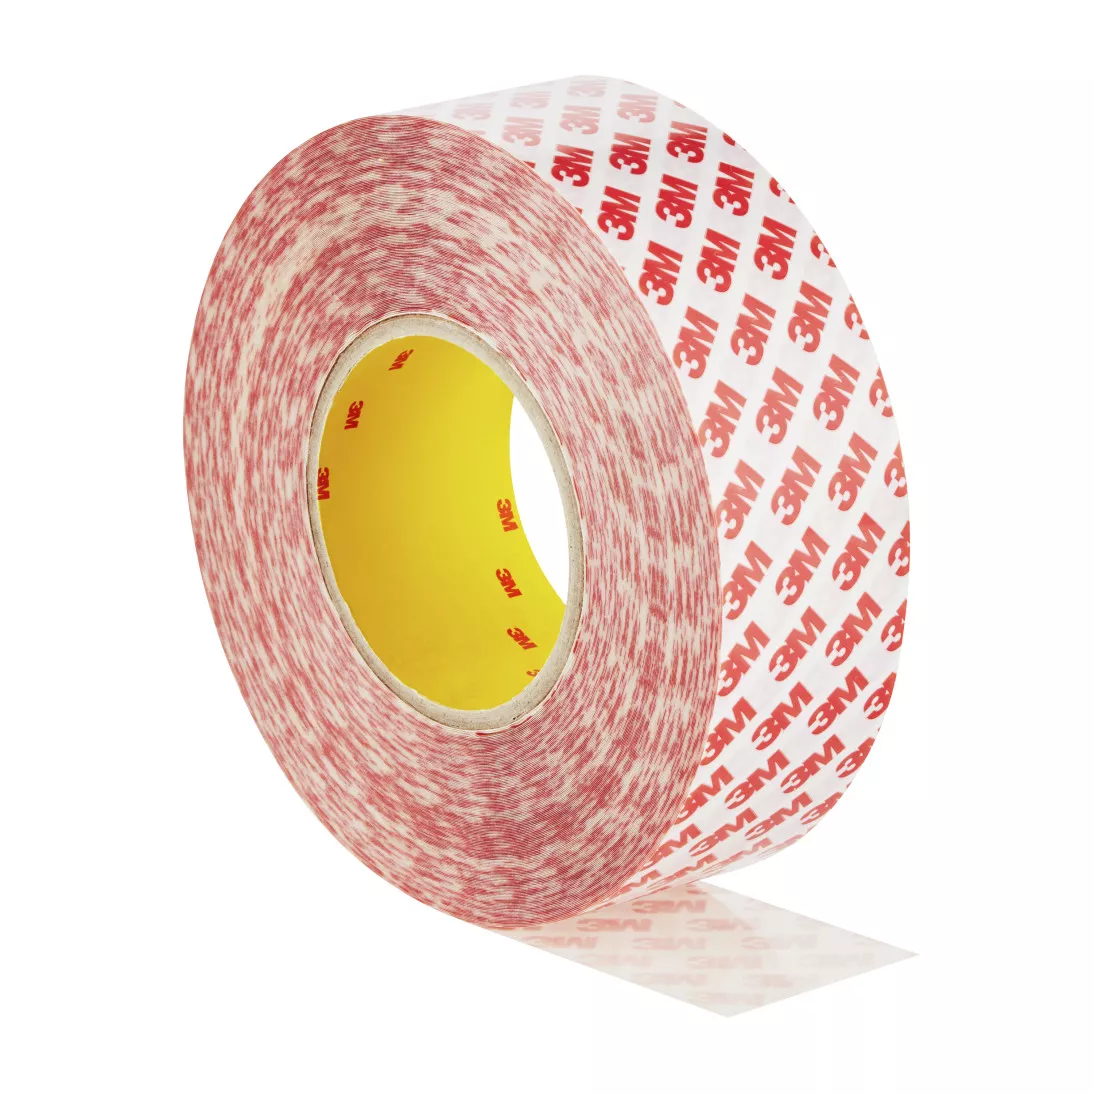 3M™ Double Coated Tape Paper Liner GPT-020, 50 mm x 50 m, 6 Roll/Case